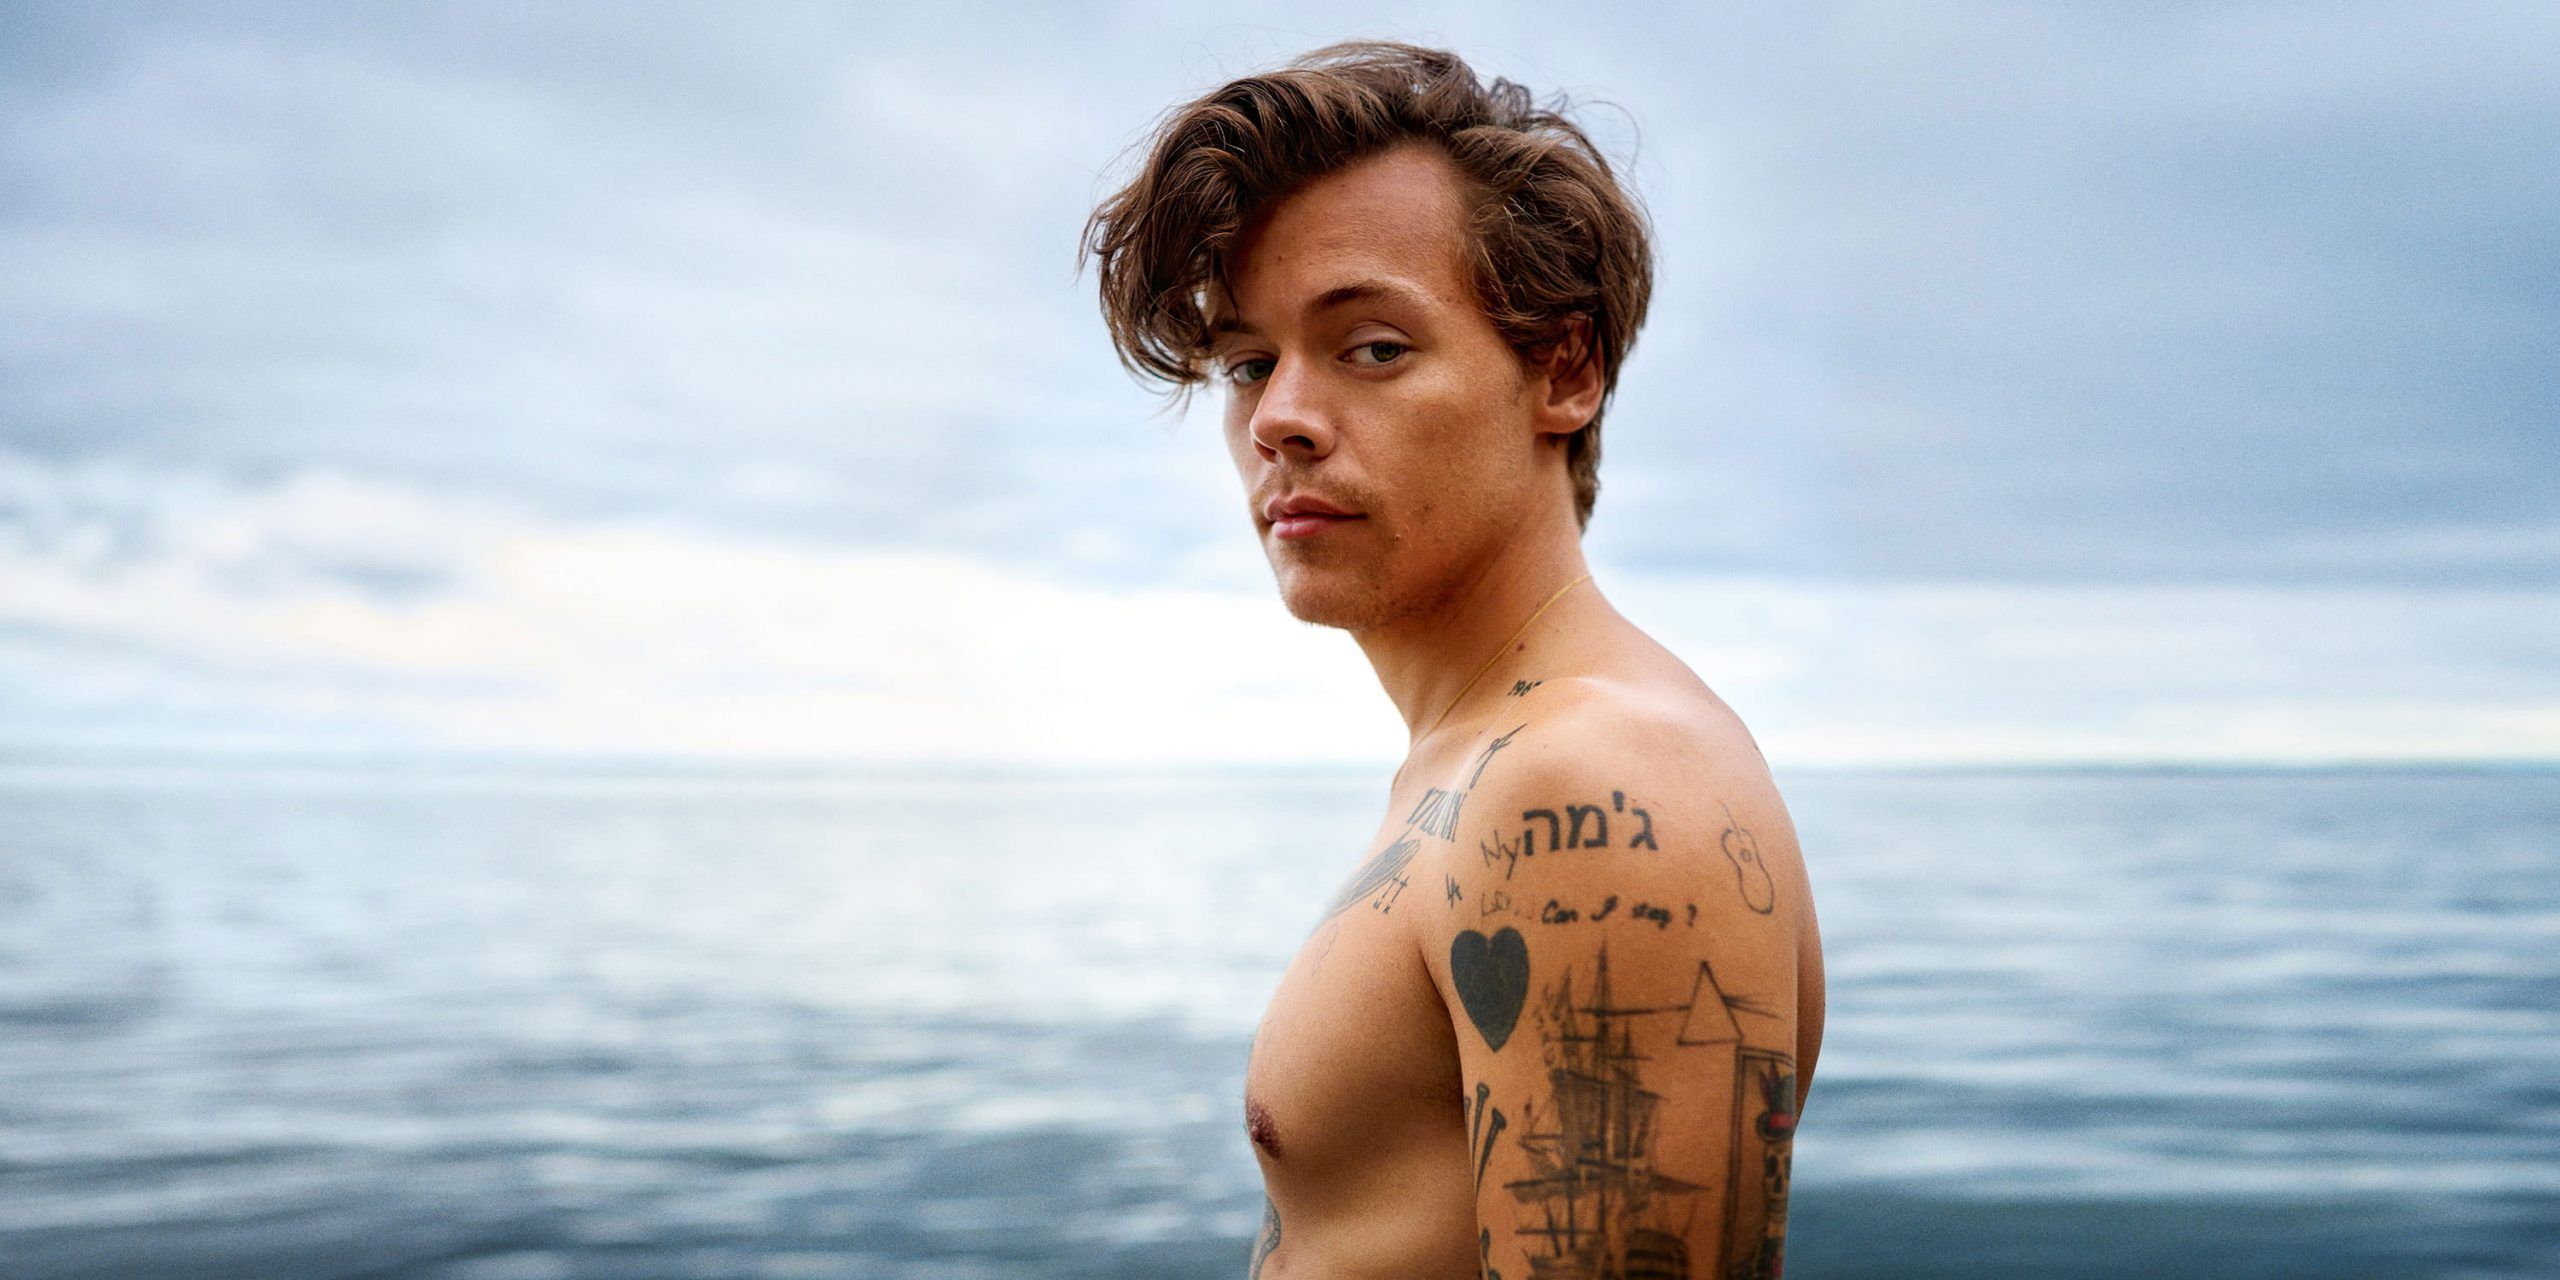 Harry Styles shirtless standing in front of the ocean - Harry Styles